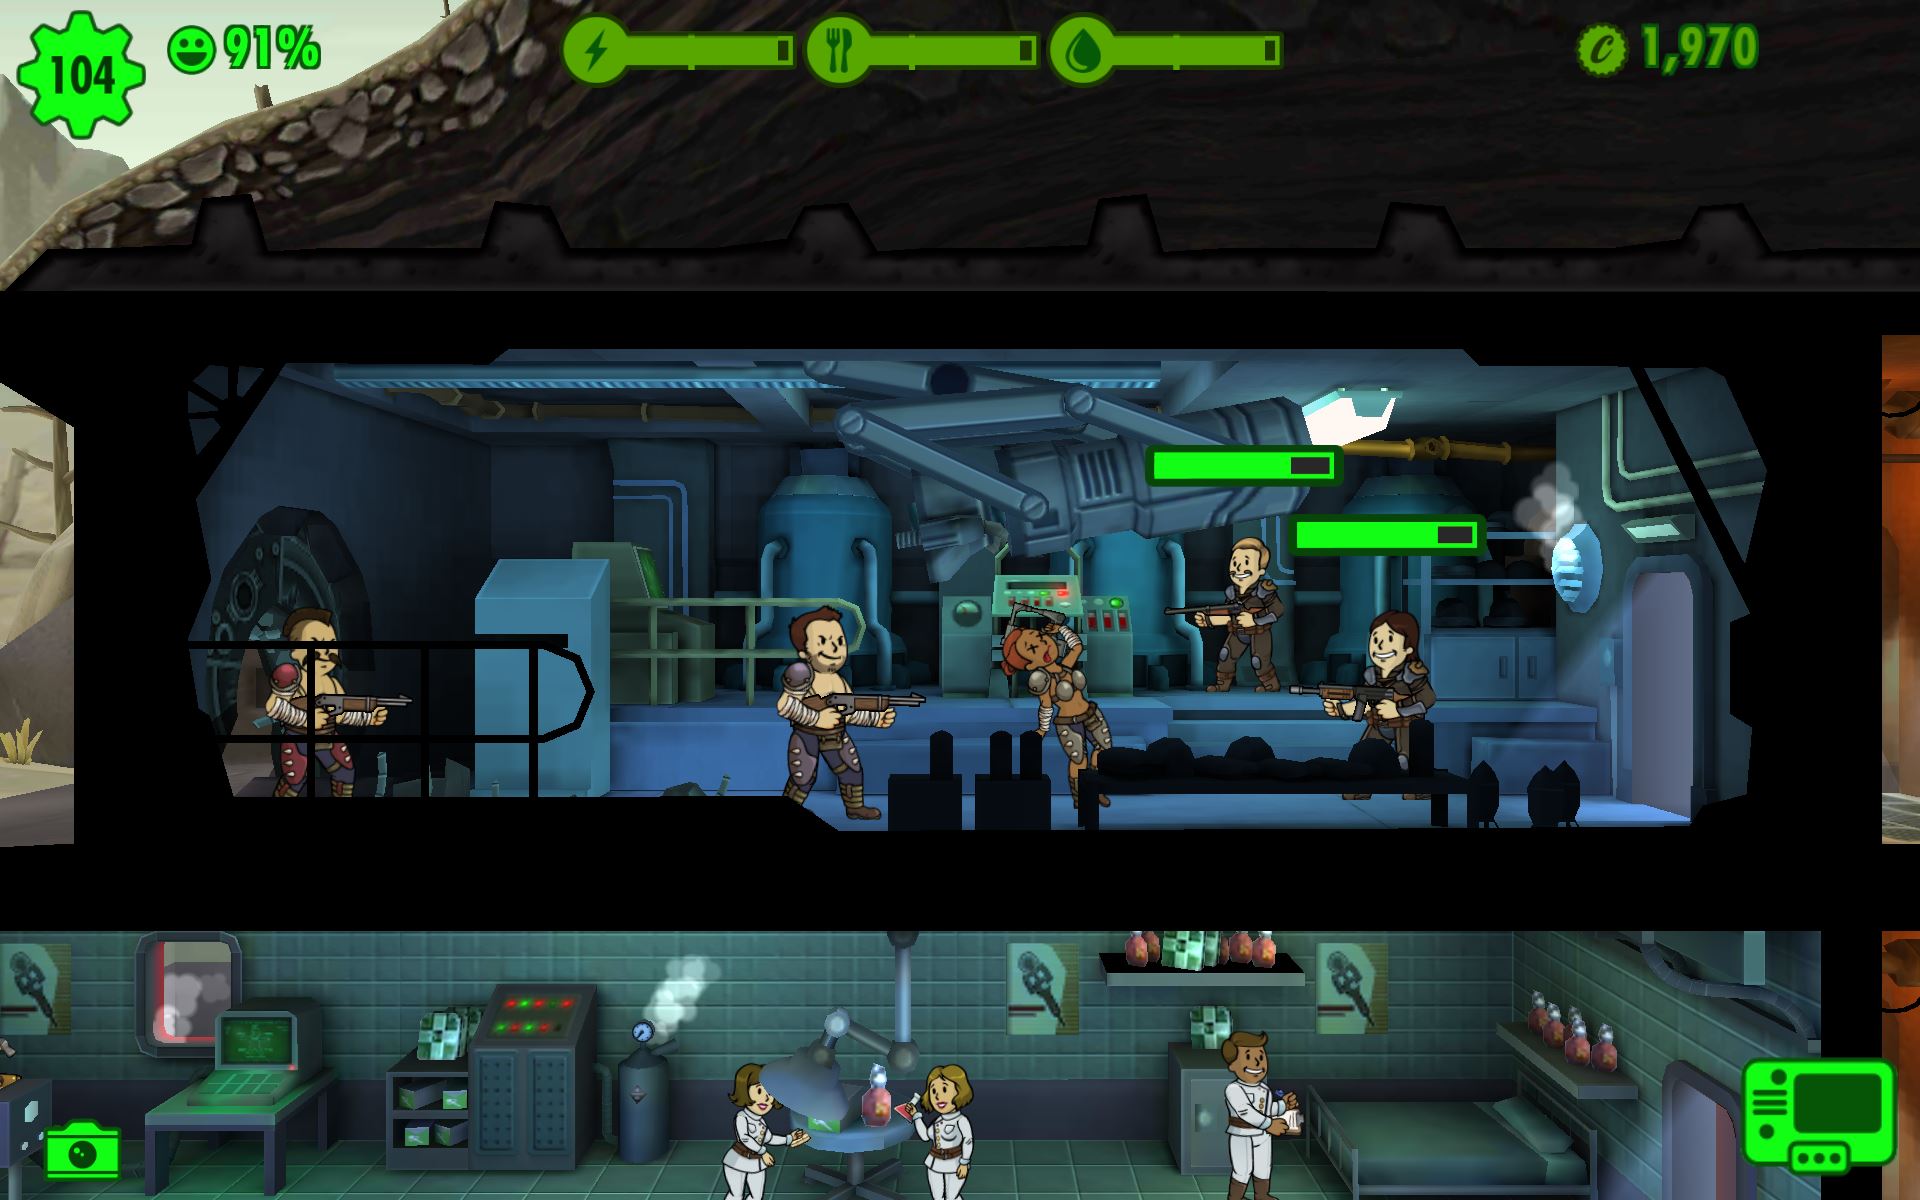 fallout shelter building tips